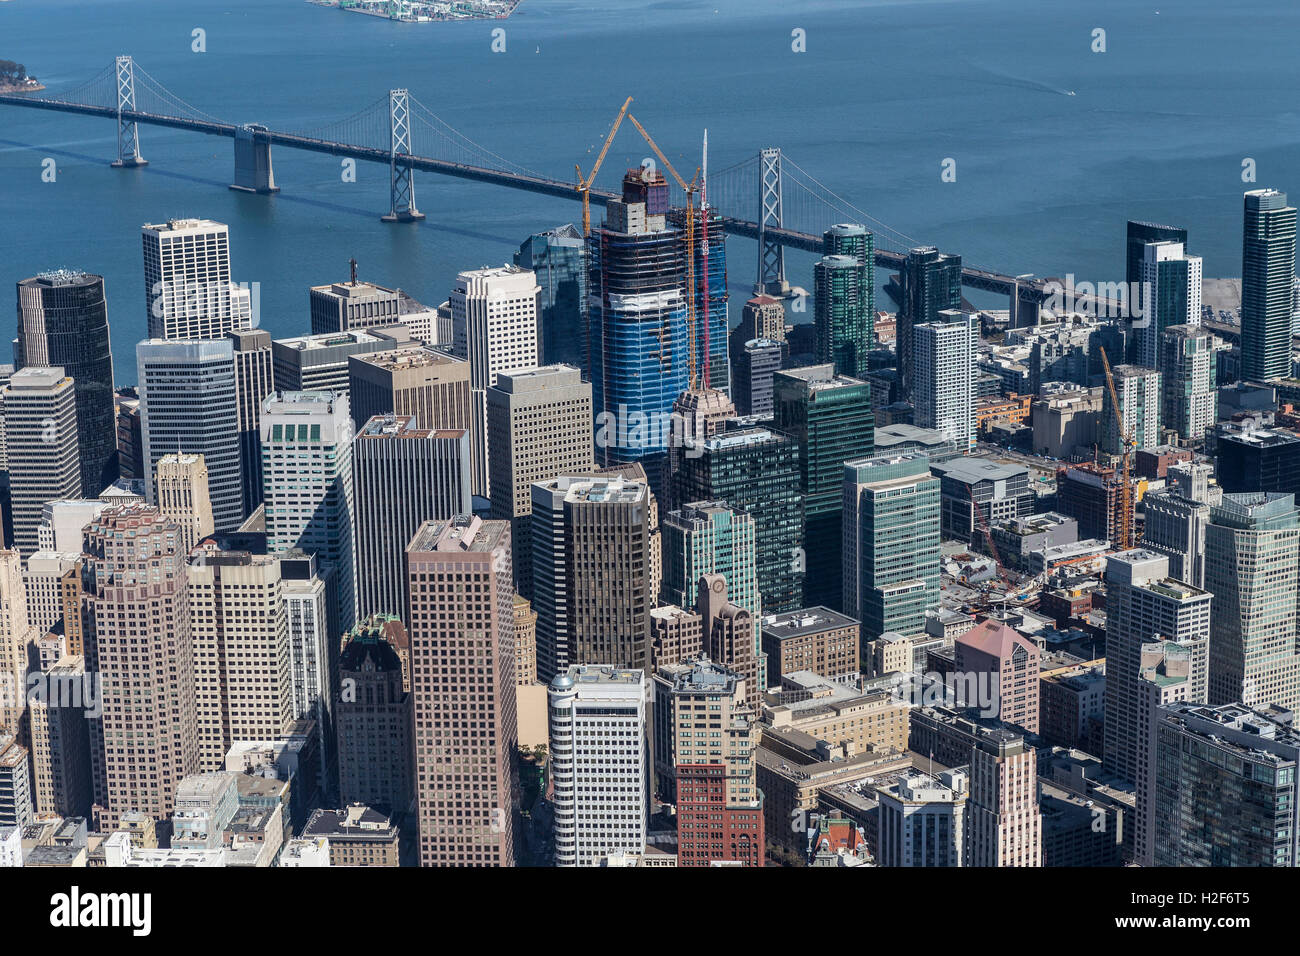 Aerial view of San Francisco city and bay. Stock Photo